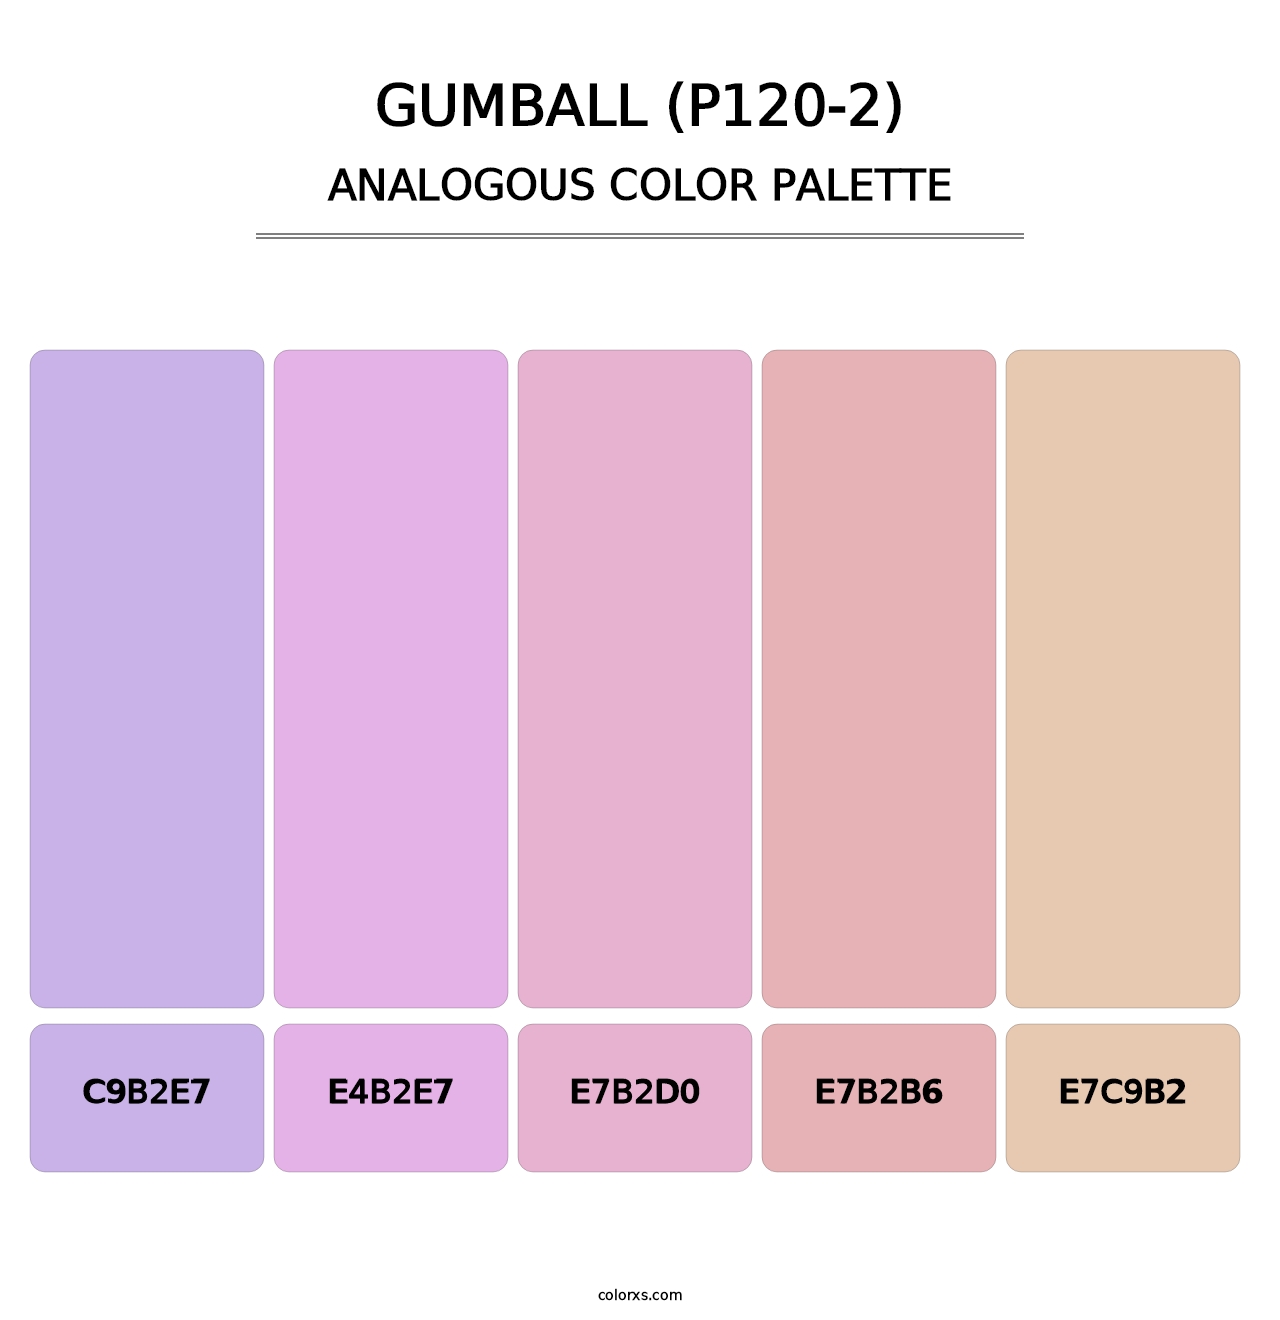 Gumball (P120-2) - Analogous Color Palette